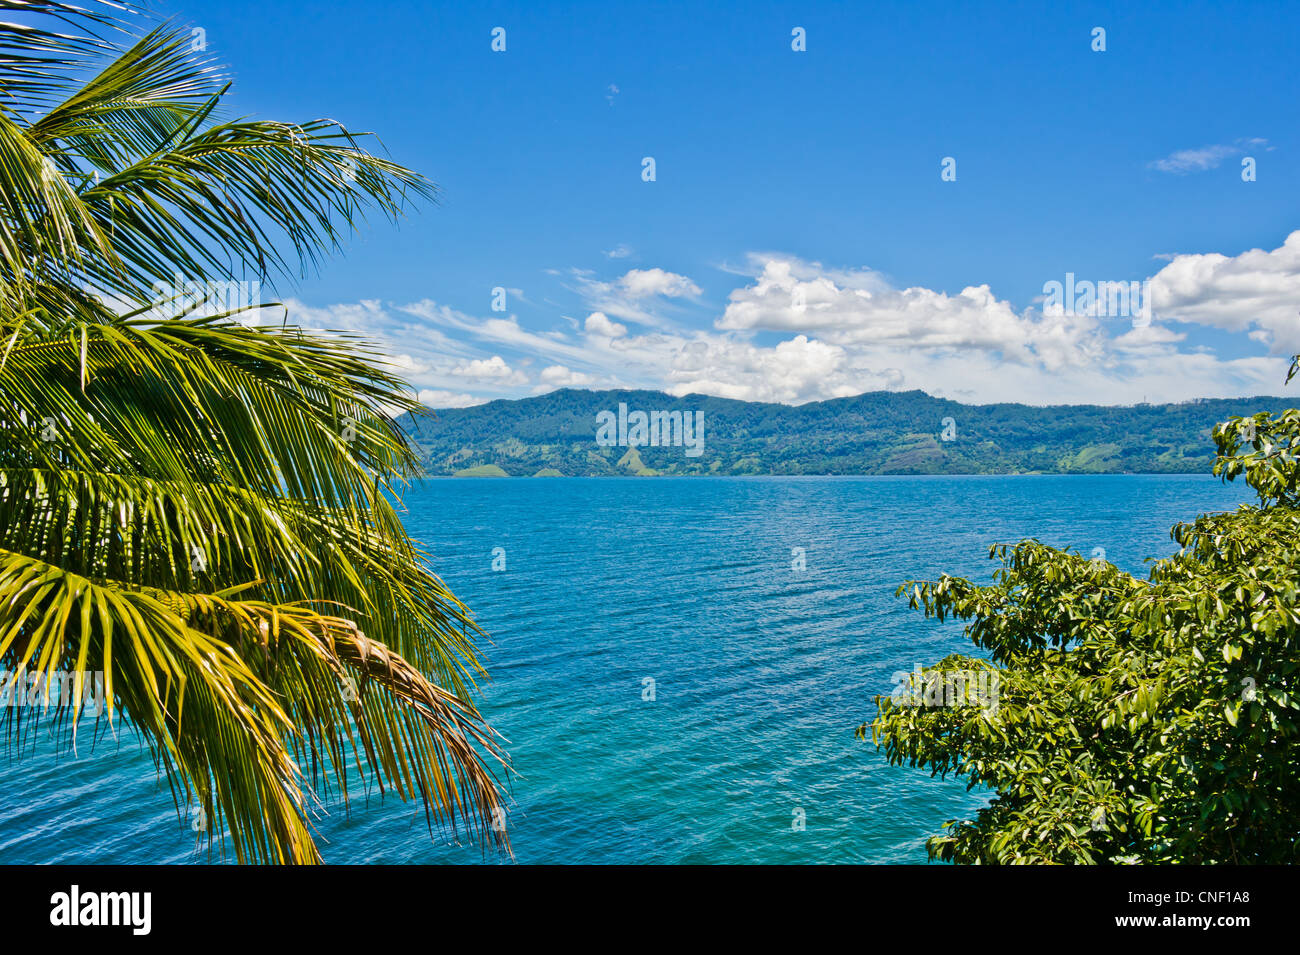 View of Lake Toba in Sumatra, Indonesia, Southeast Asia. It is the largest and deepest volcanic crater lake in the world. Stock Photo